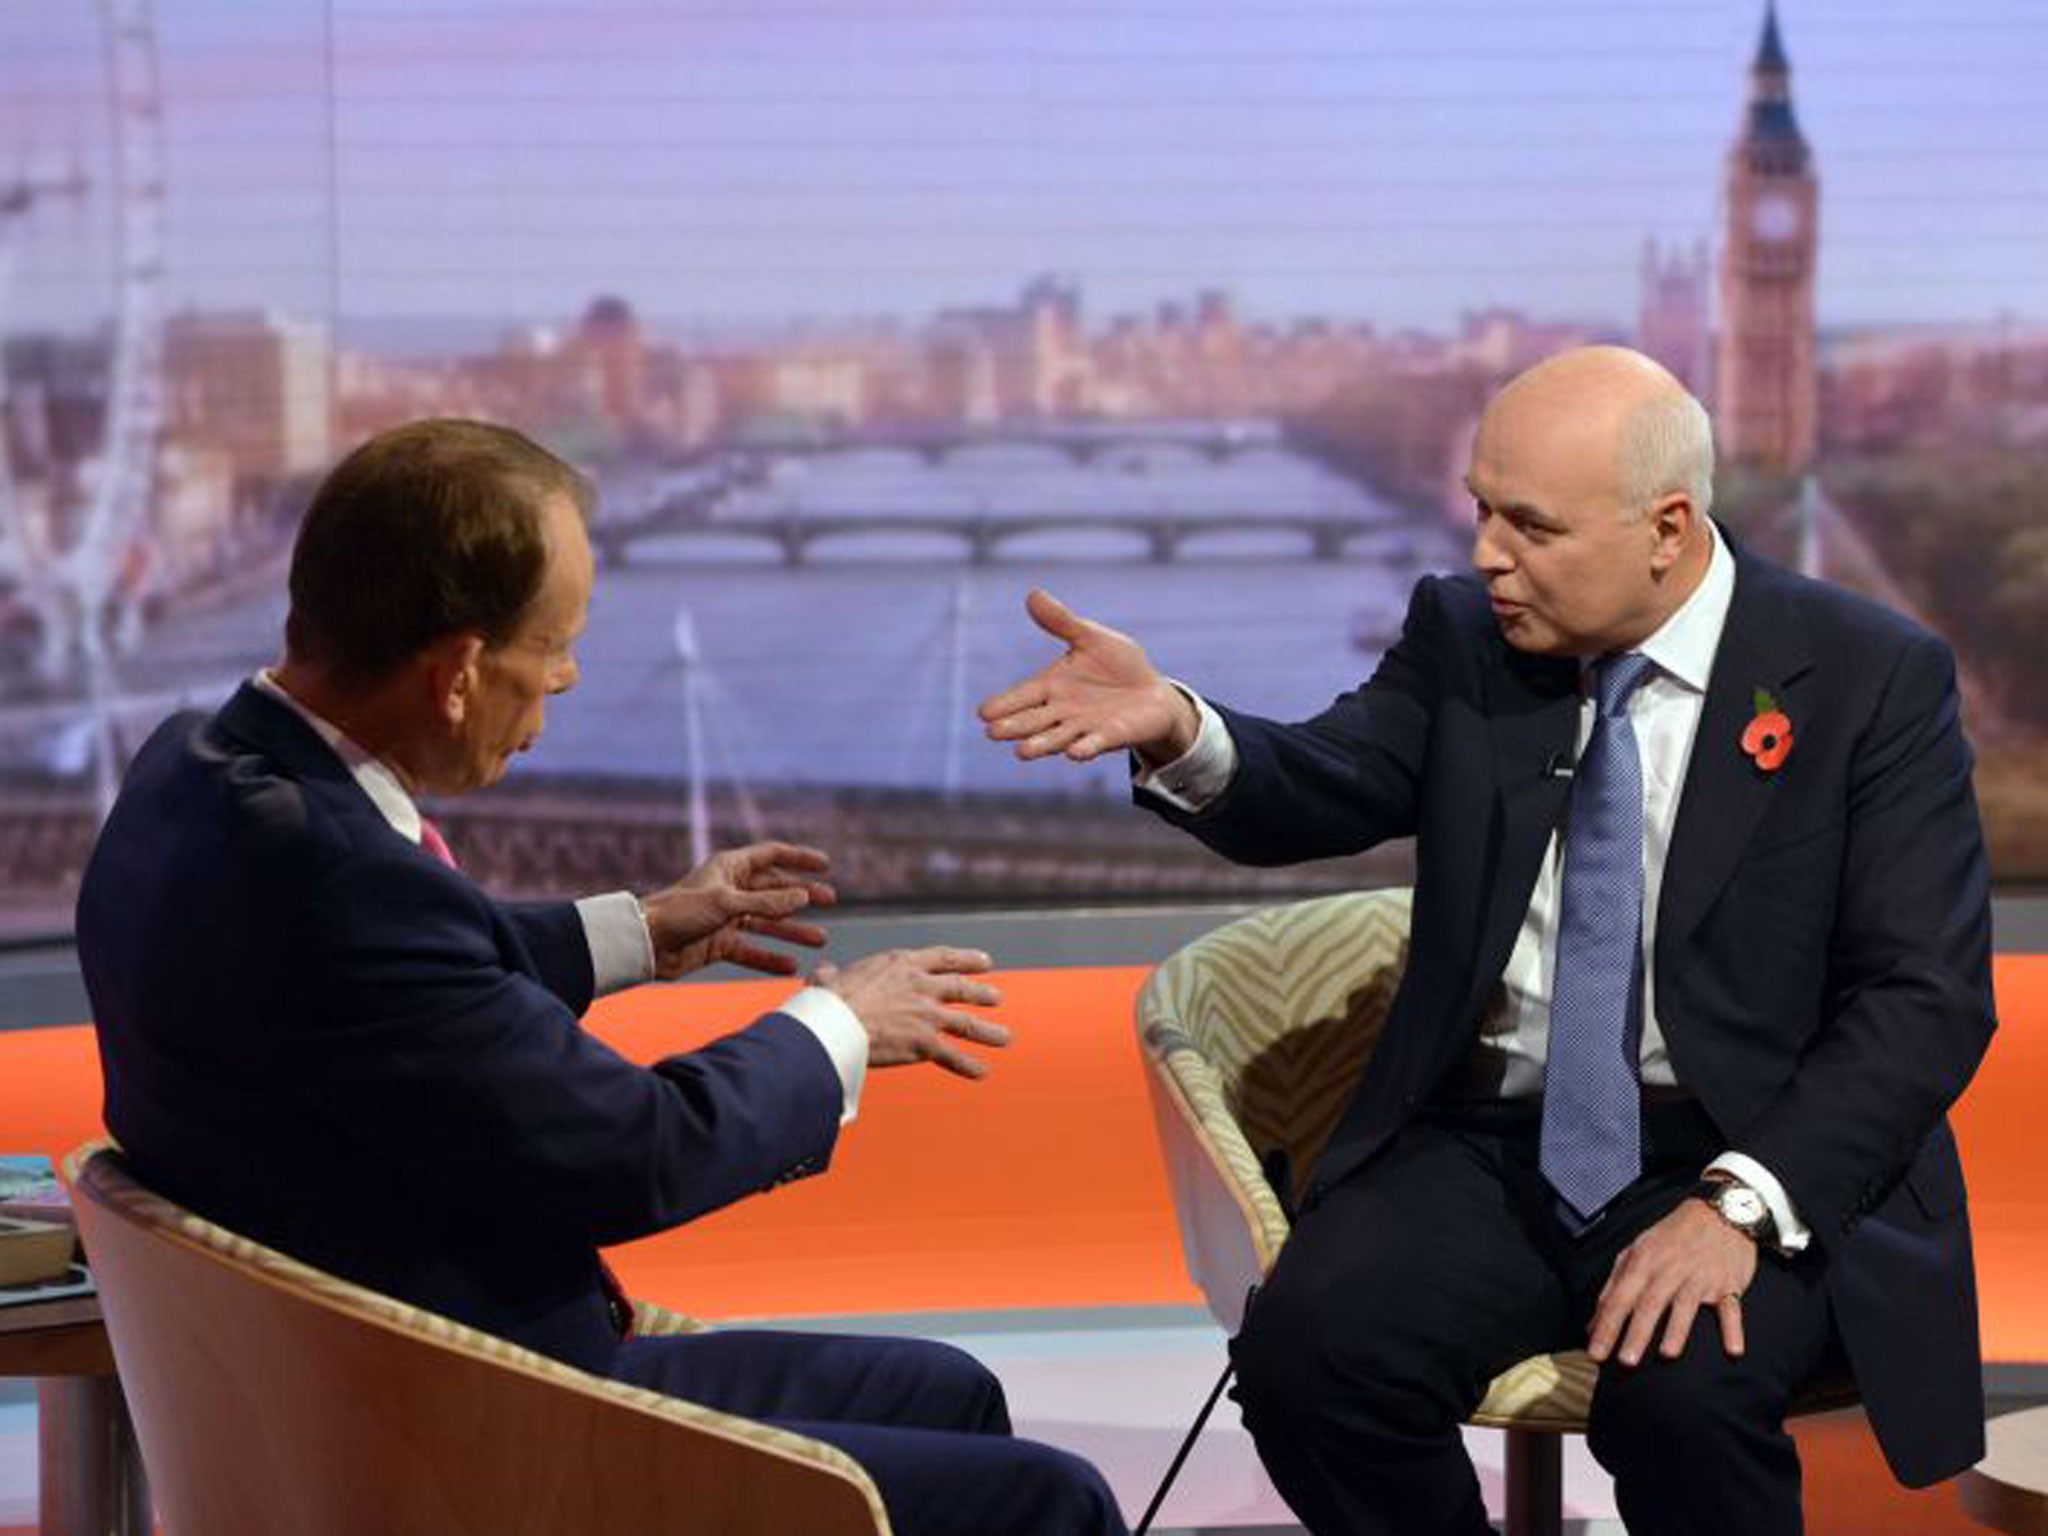 Iain Duncan Smith is prepared to agree to a benefits freeze